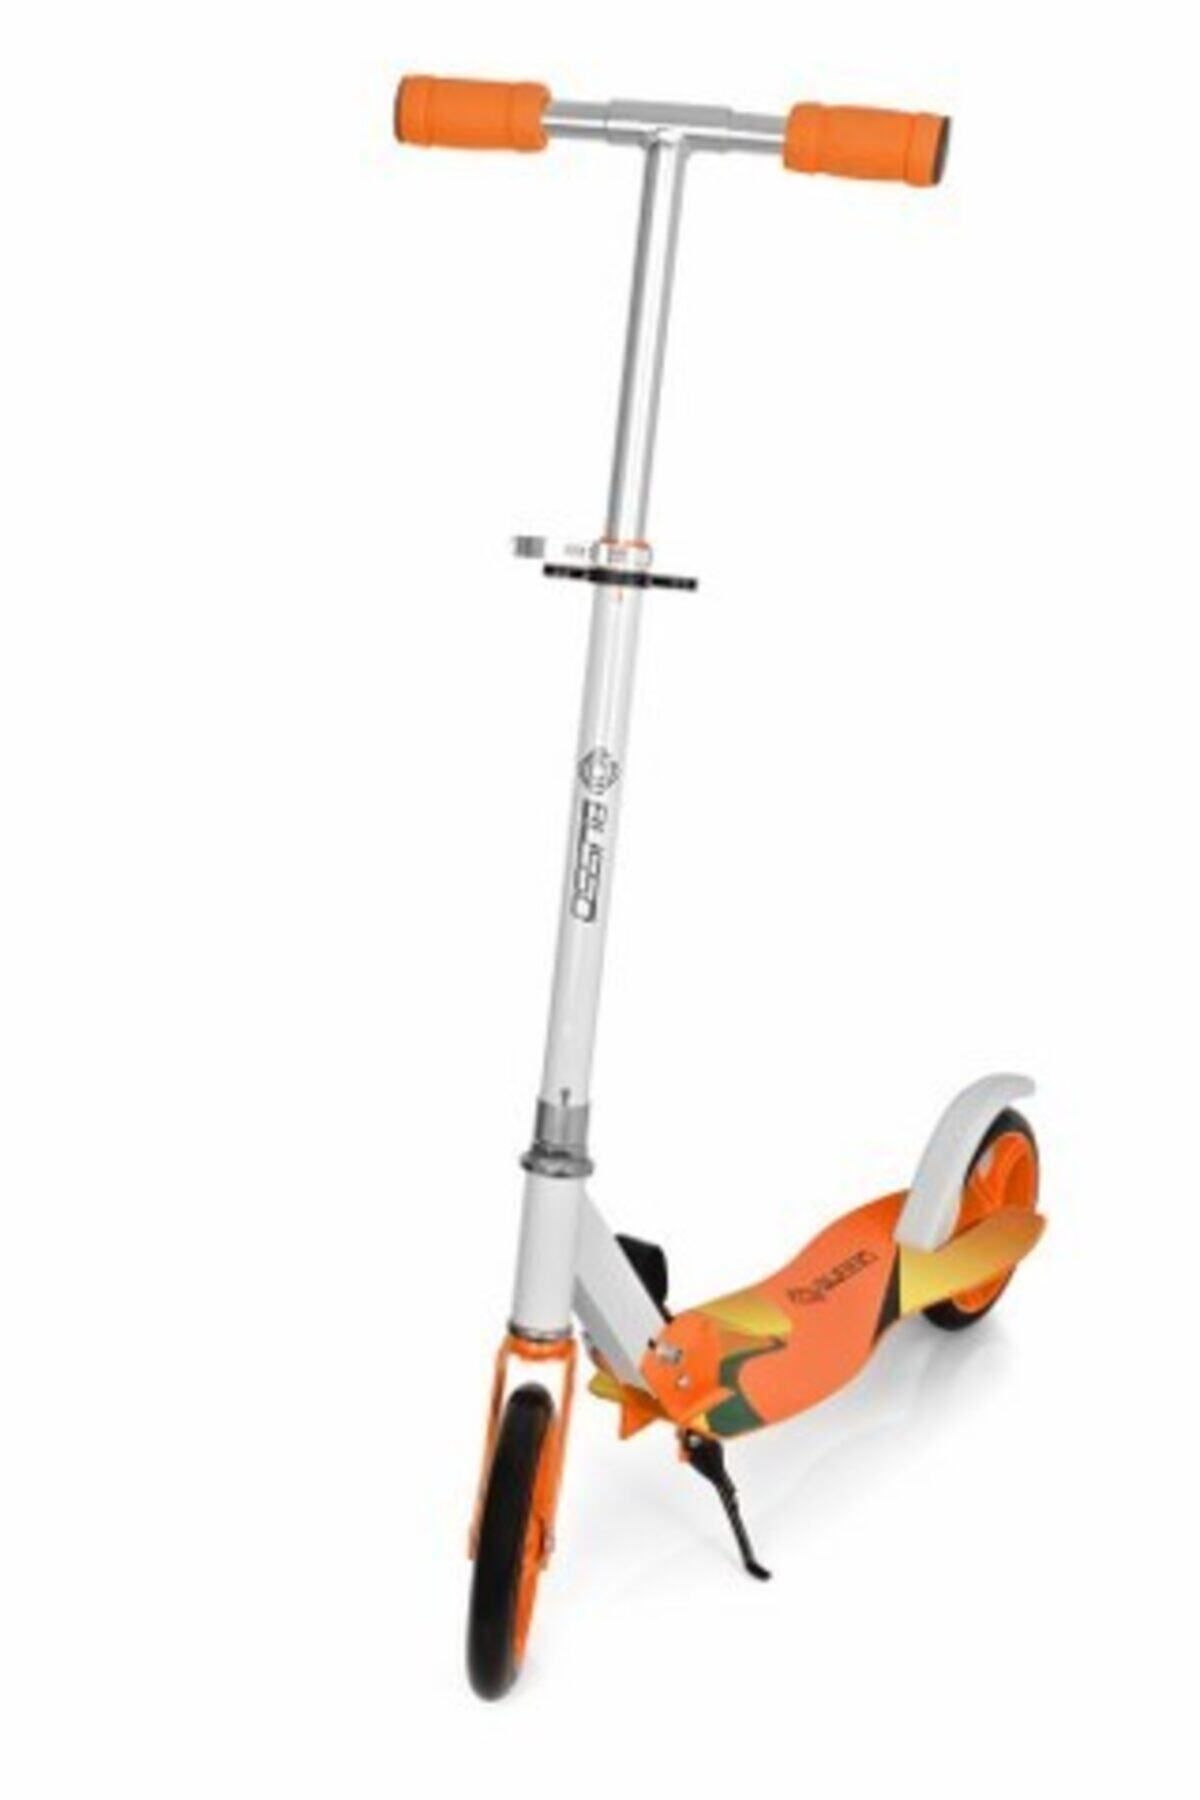 Busso Unisex Scooter - Busso Scooter S200E Scooter - S200E-ORANGE